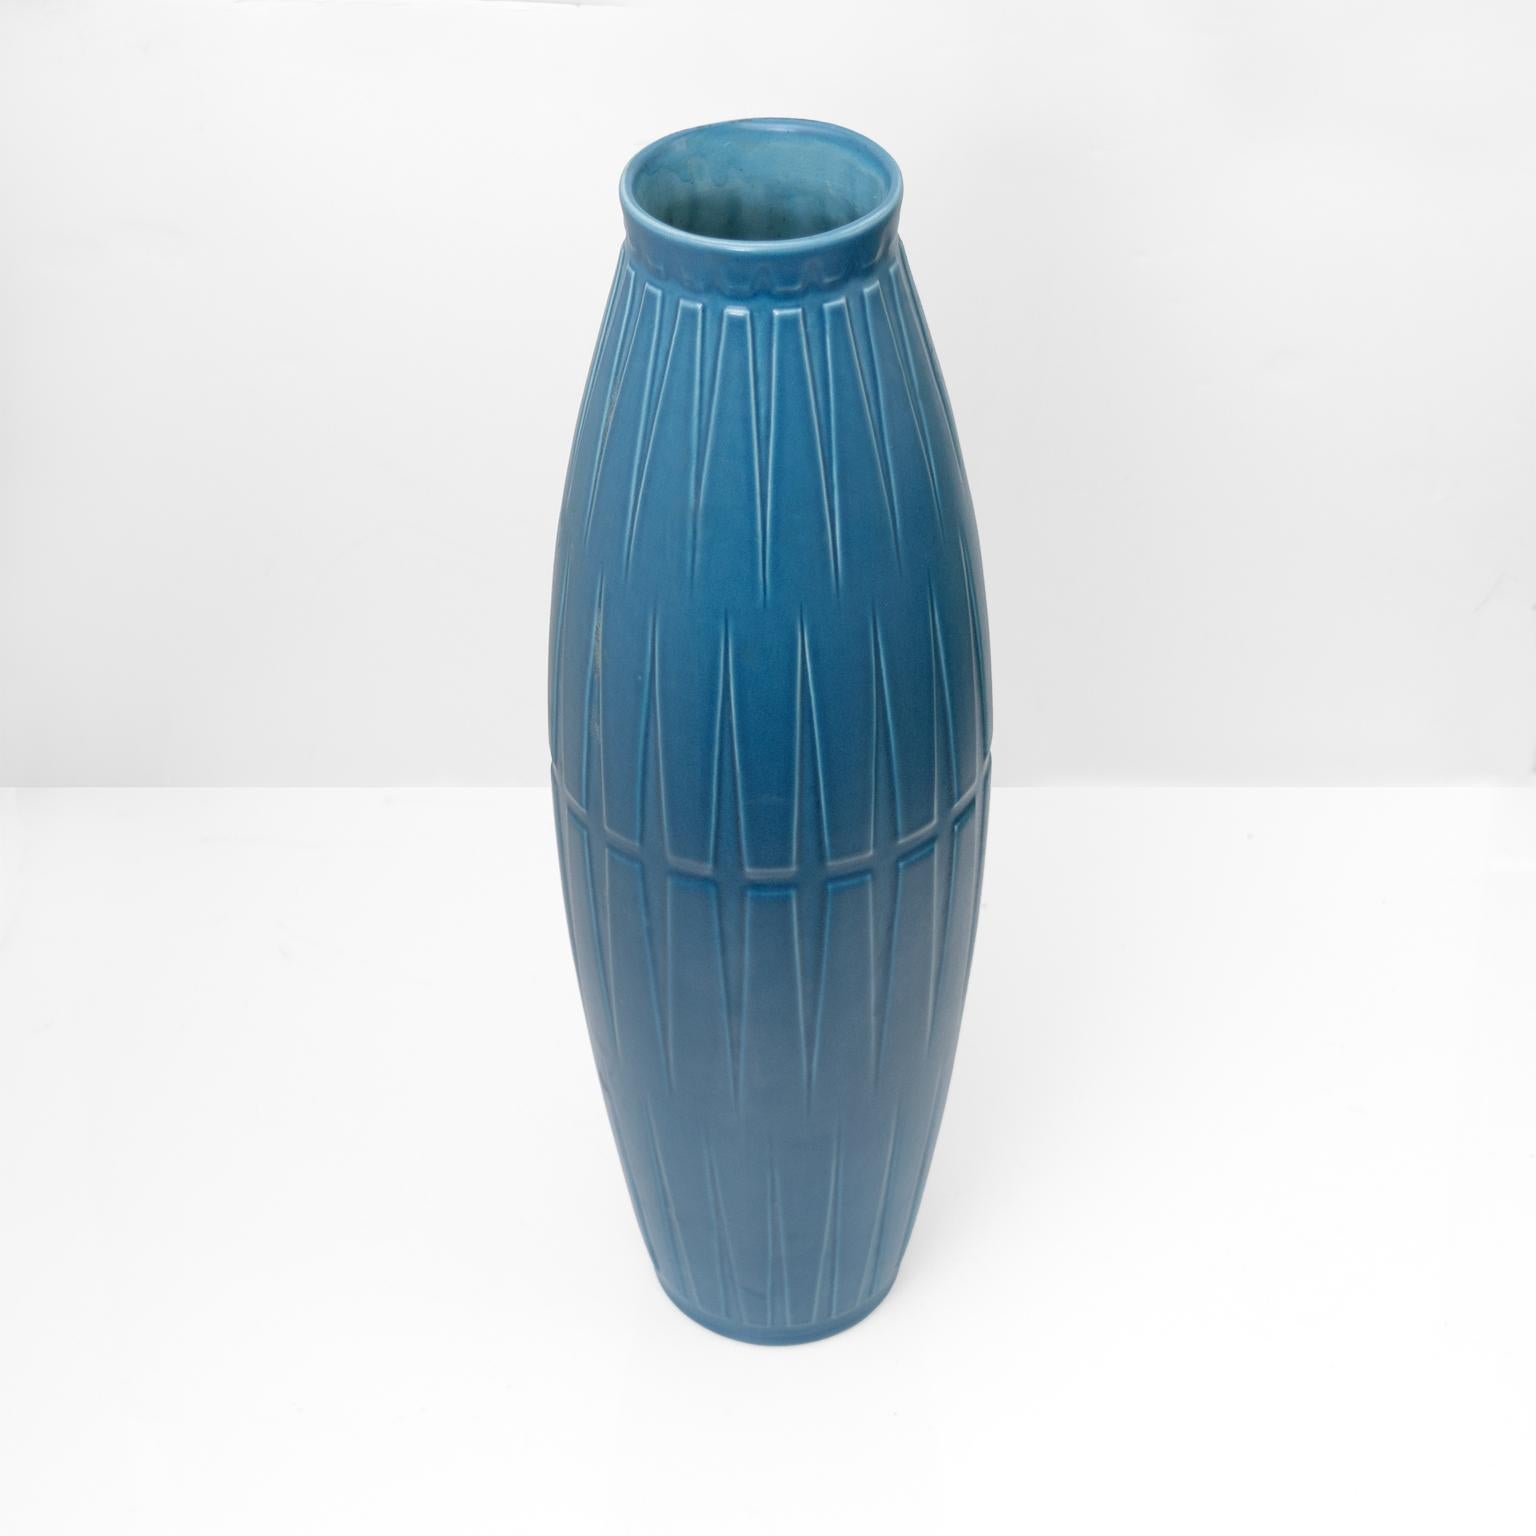 A tall elegant ceramic vase in blue with a geometric pattern in relief. Produced by Bo Fajans (1874-1967) Sweden., circa late 1940’s

Height: 19.25”. Diameter: 6”